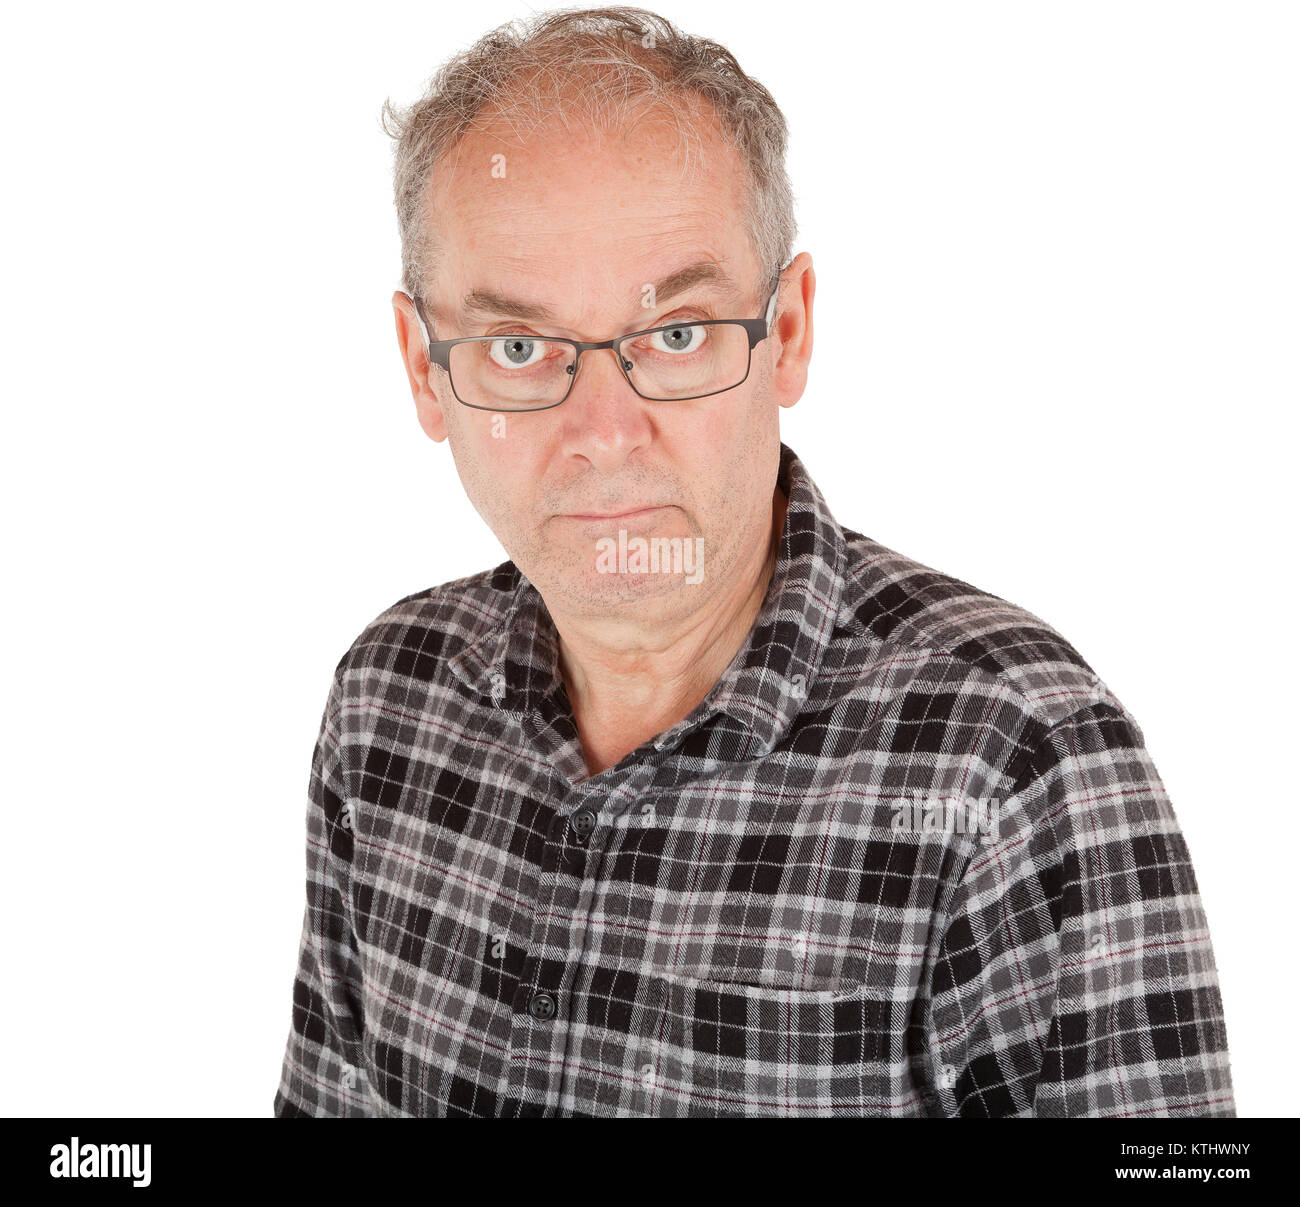 A straight-face, poker face man looking at the camera Stock Photo - Alamy